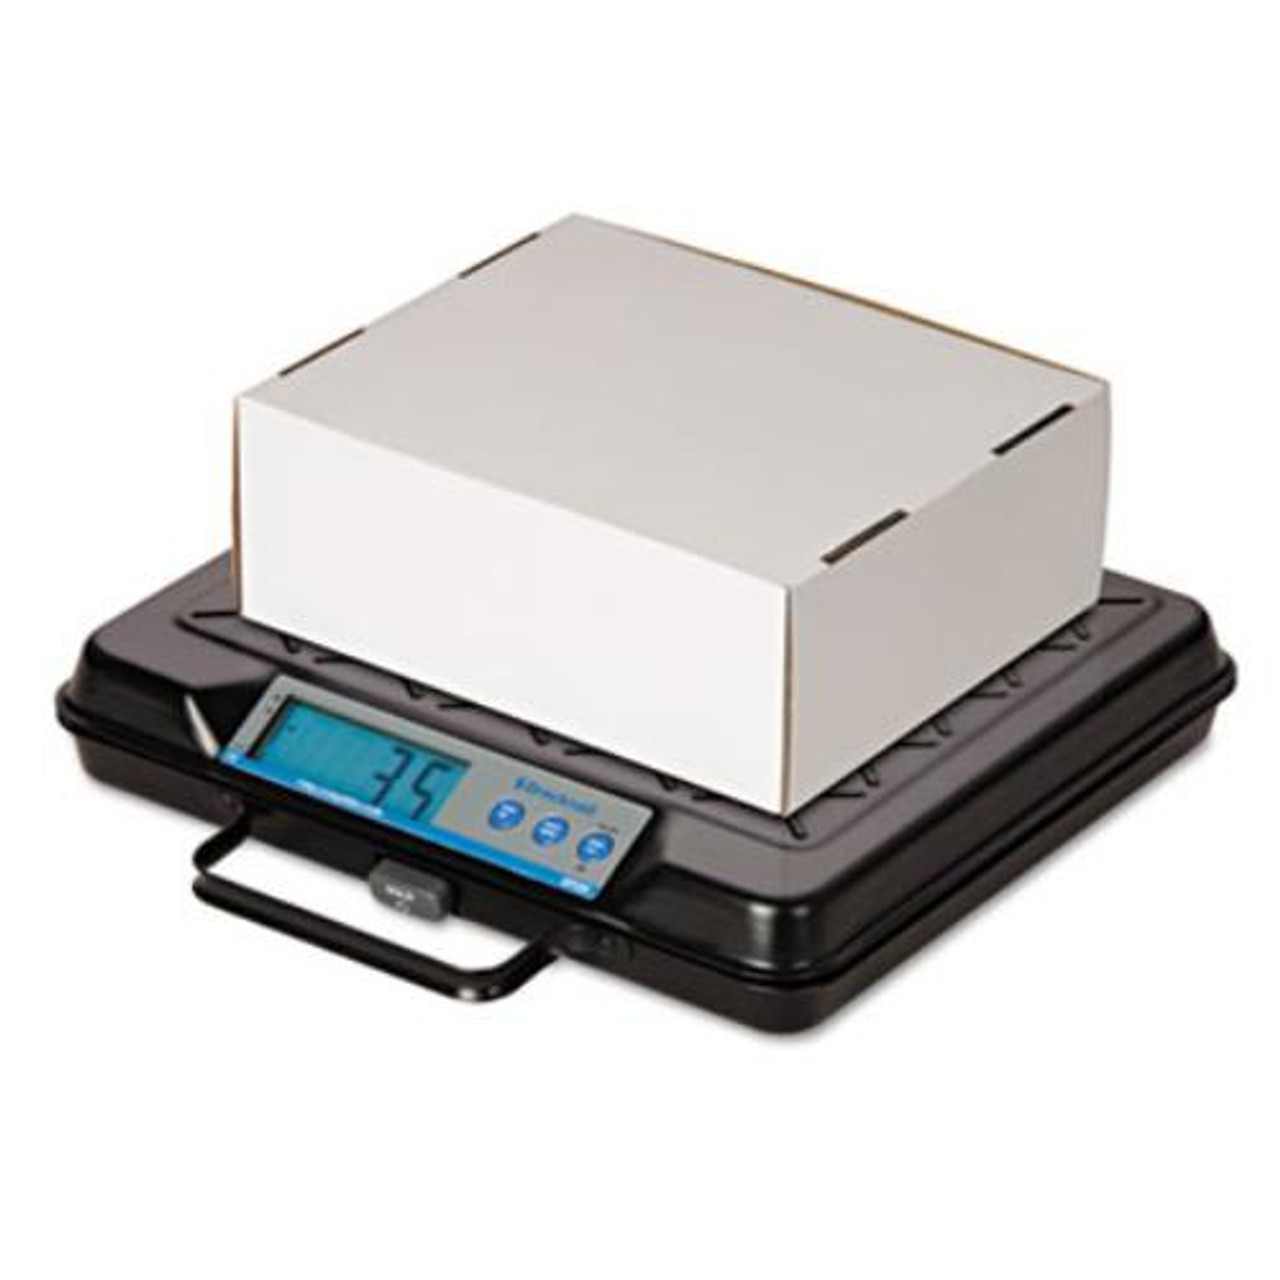 Brecknell Electronic Office Scale, 11-Lb Capacity